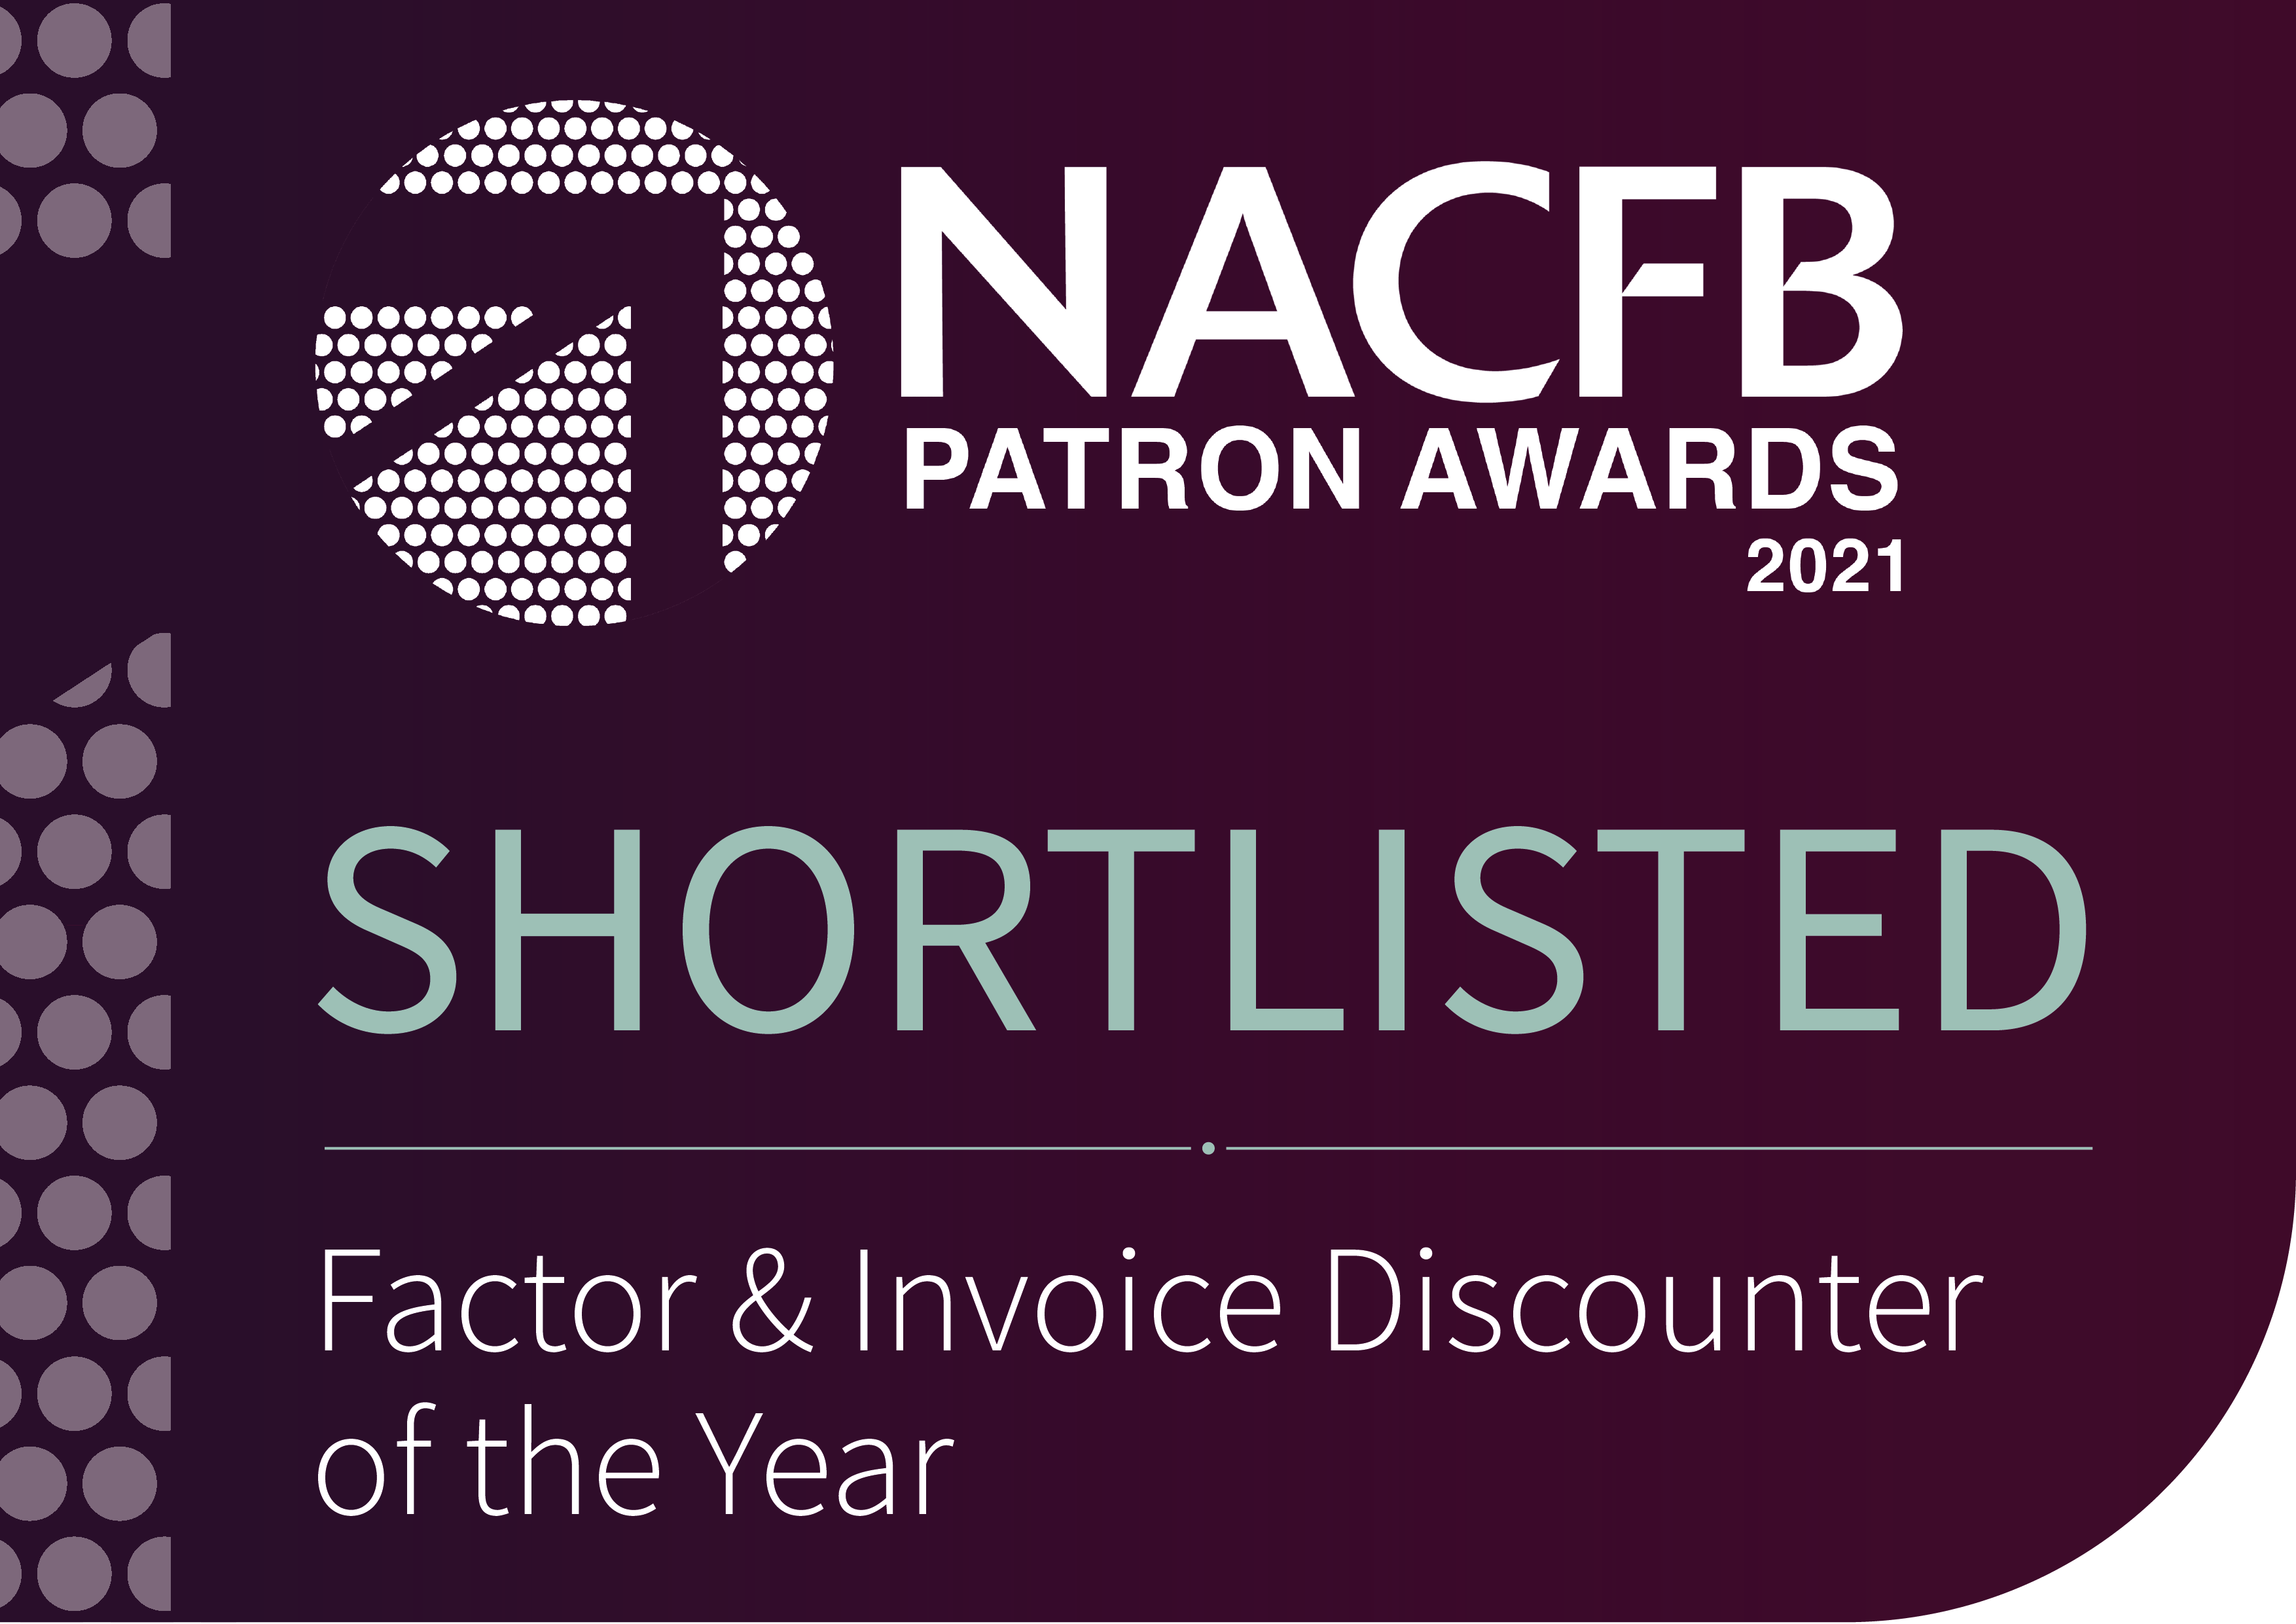 patron-awards-shortlist-factor-invoice-discounter-of-the-year (1)